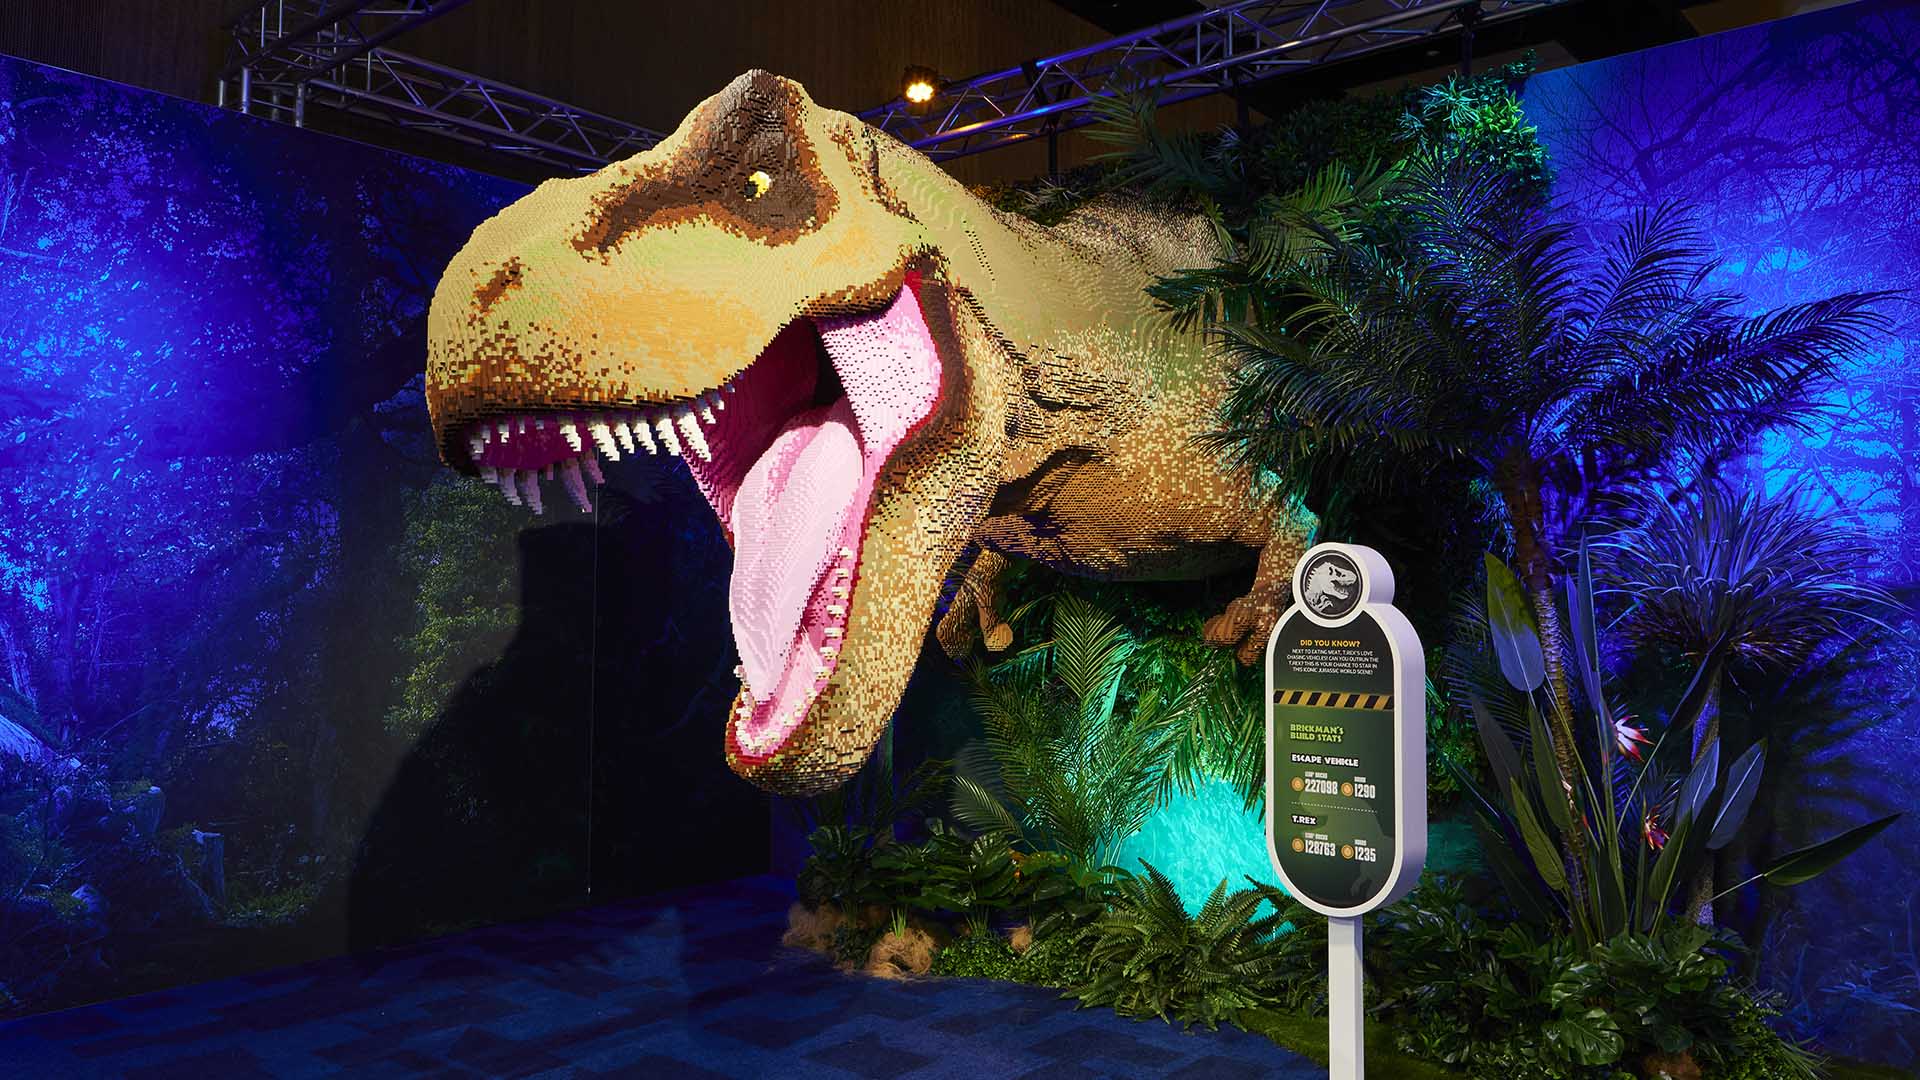 A Lego Exhibition That Recreates 'Jurassic World' with Six-Million-Plus Bricks Is Coming to Brisbane